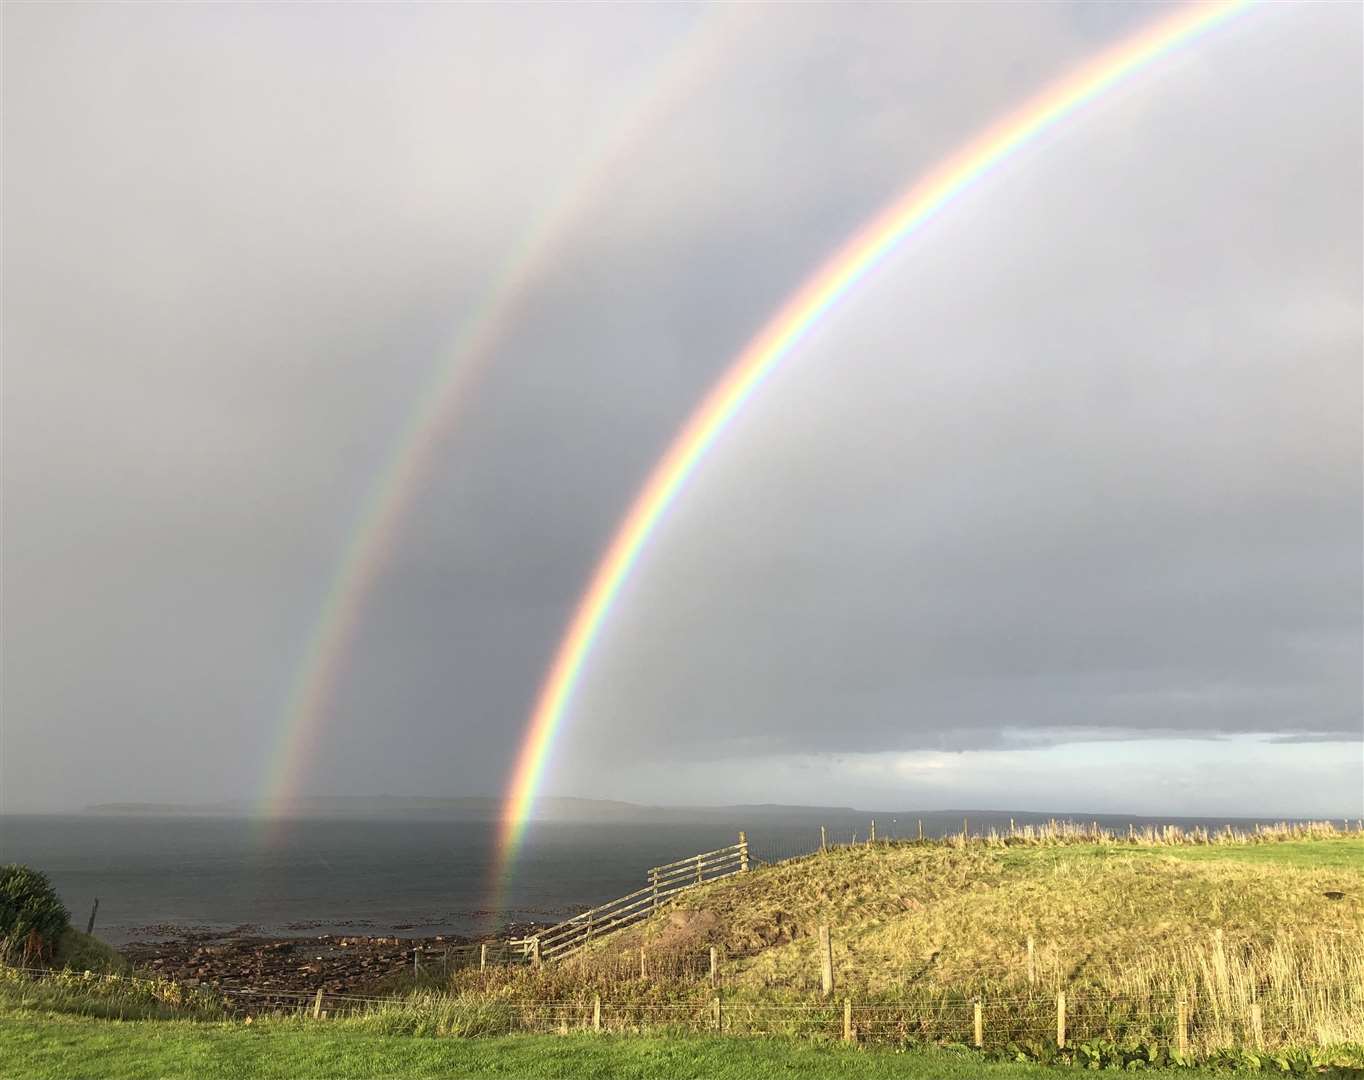 Lyall Rennie sent this dramatic shot of a double rainbow over the Pentland Firth with the island of Stroma in the background.